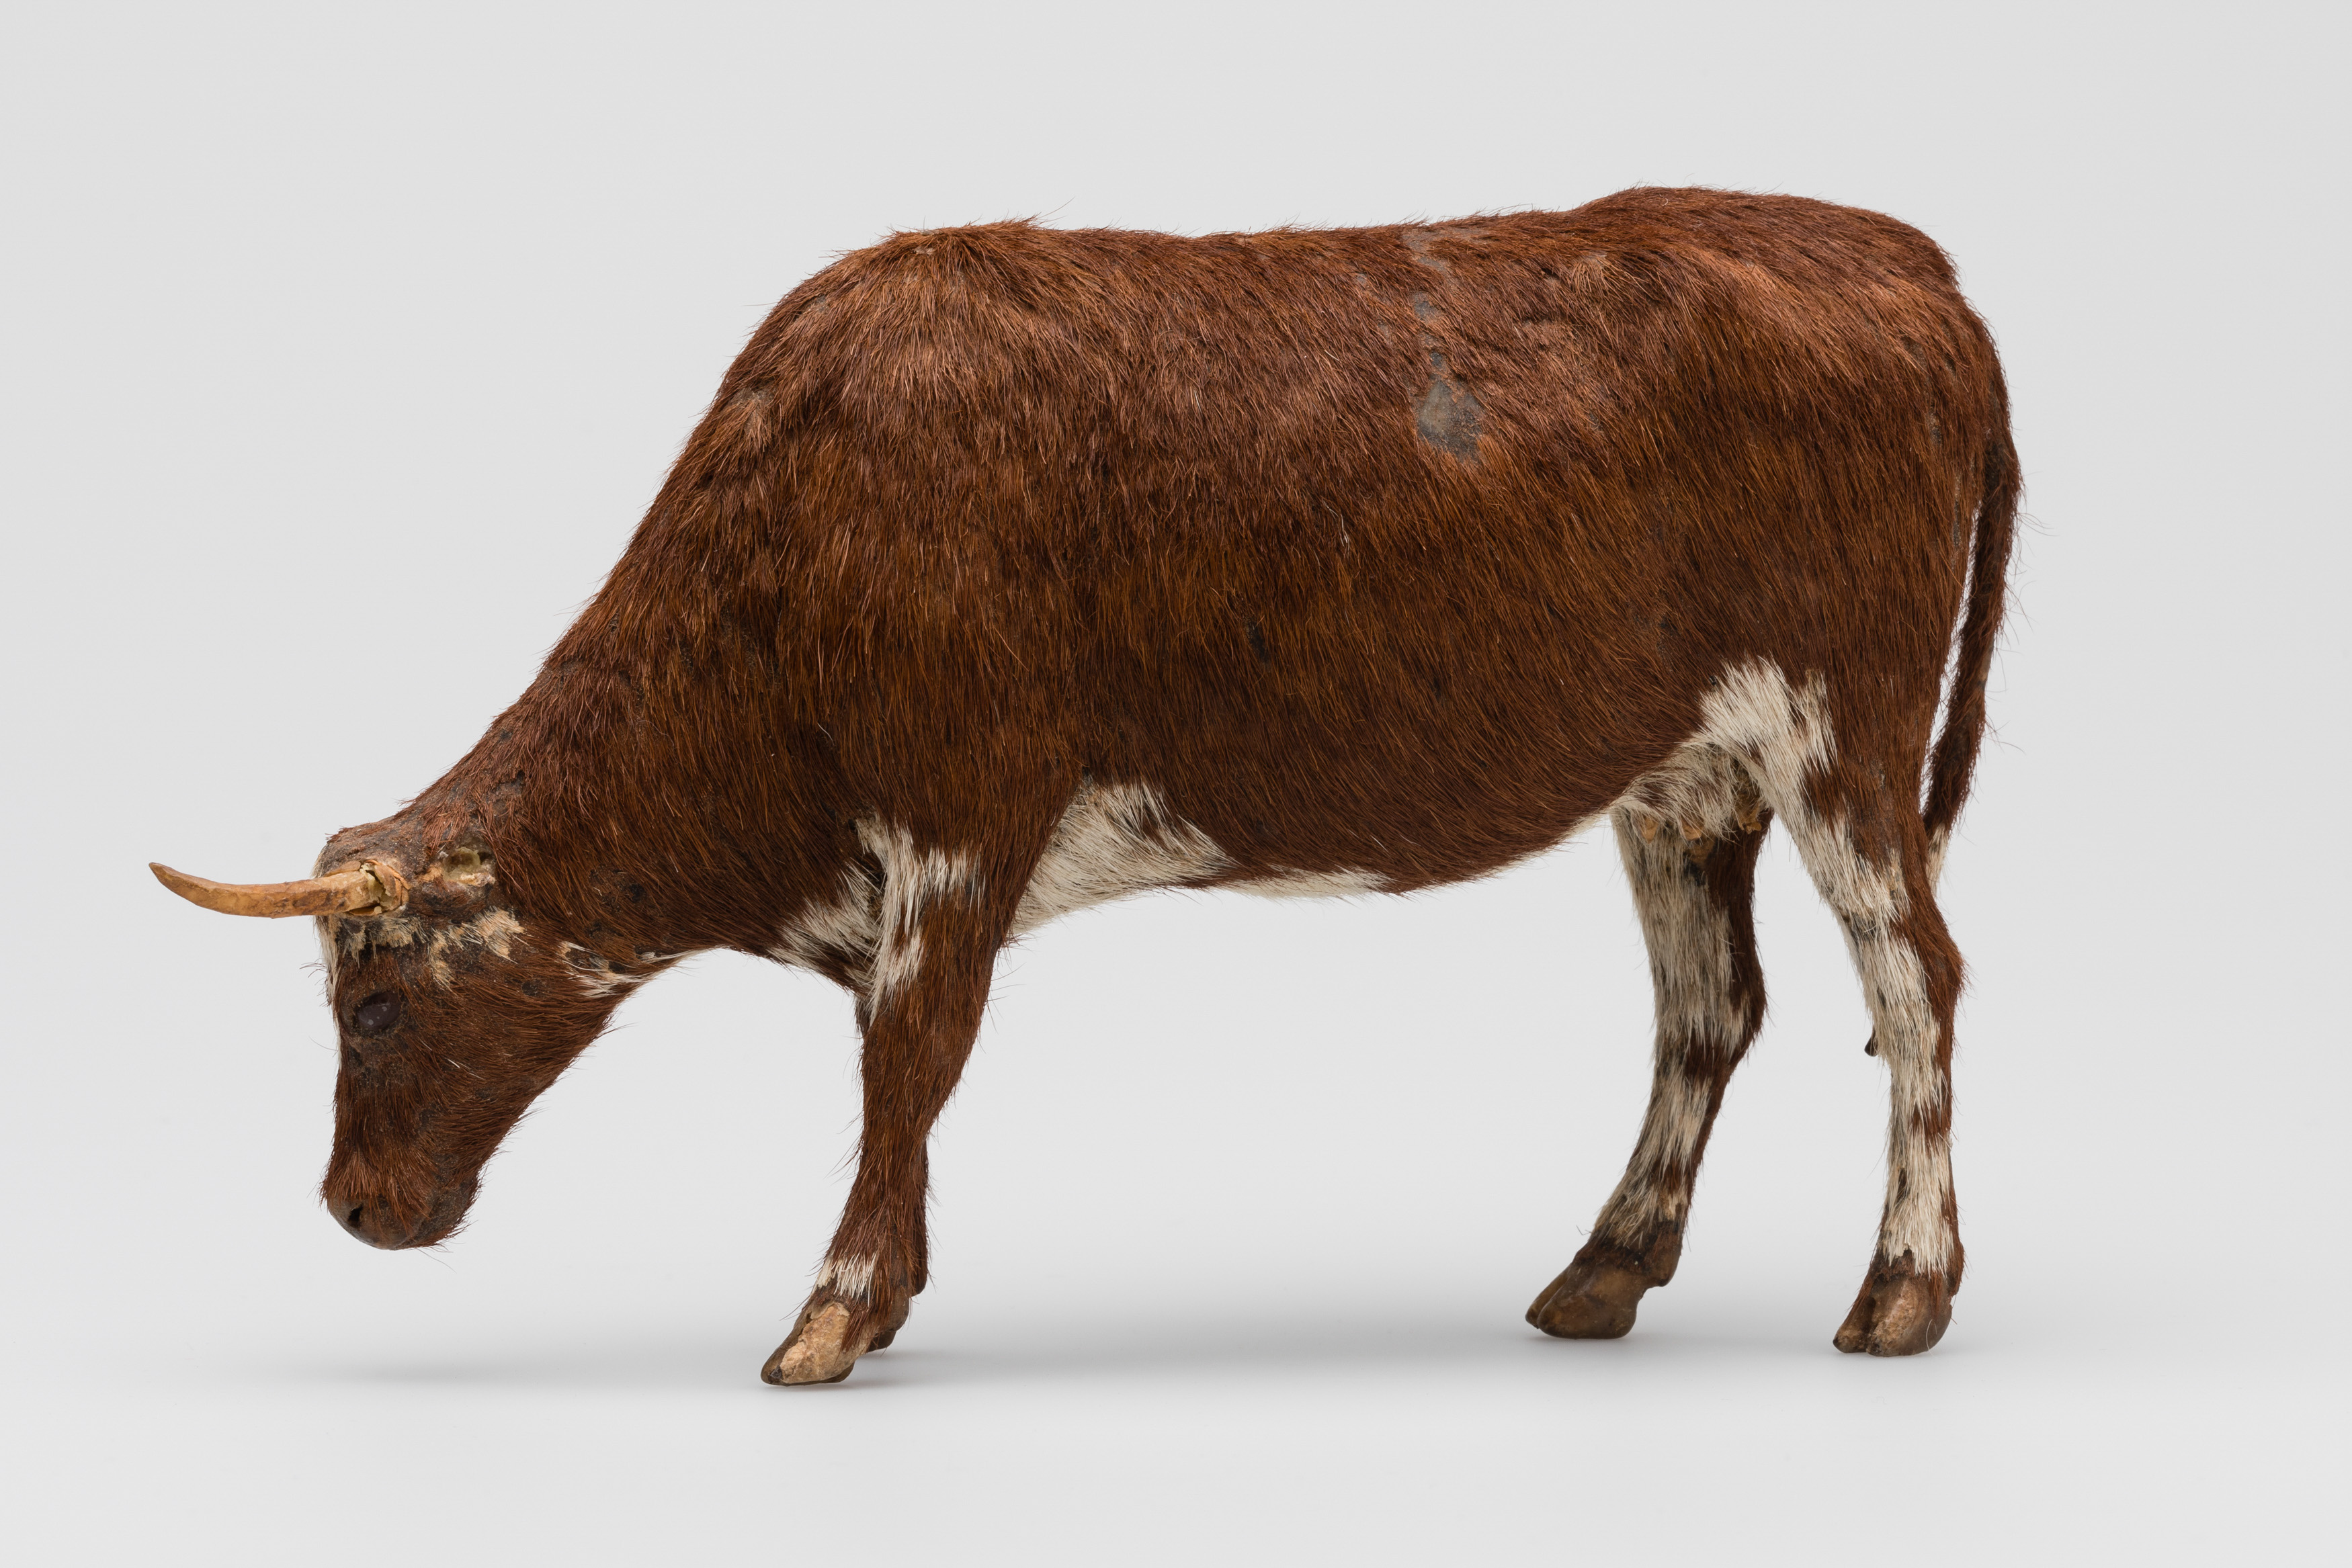 Realistic model of a cow, complete with horns and hair coat.